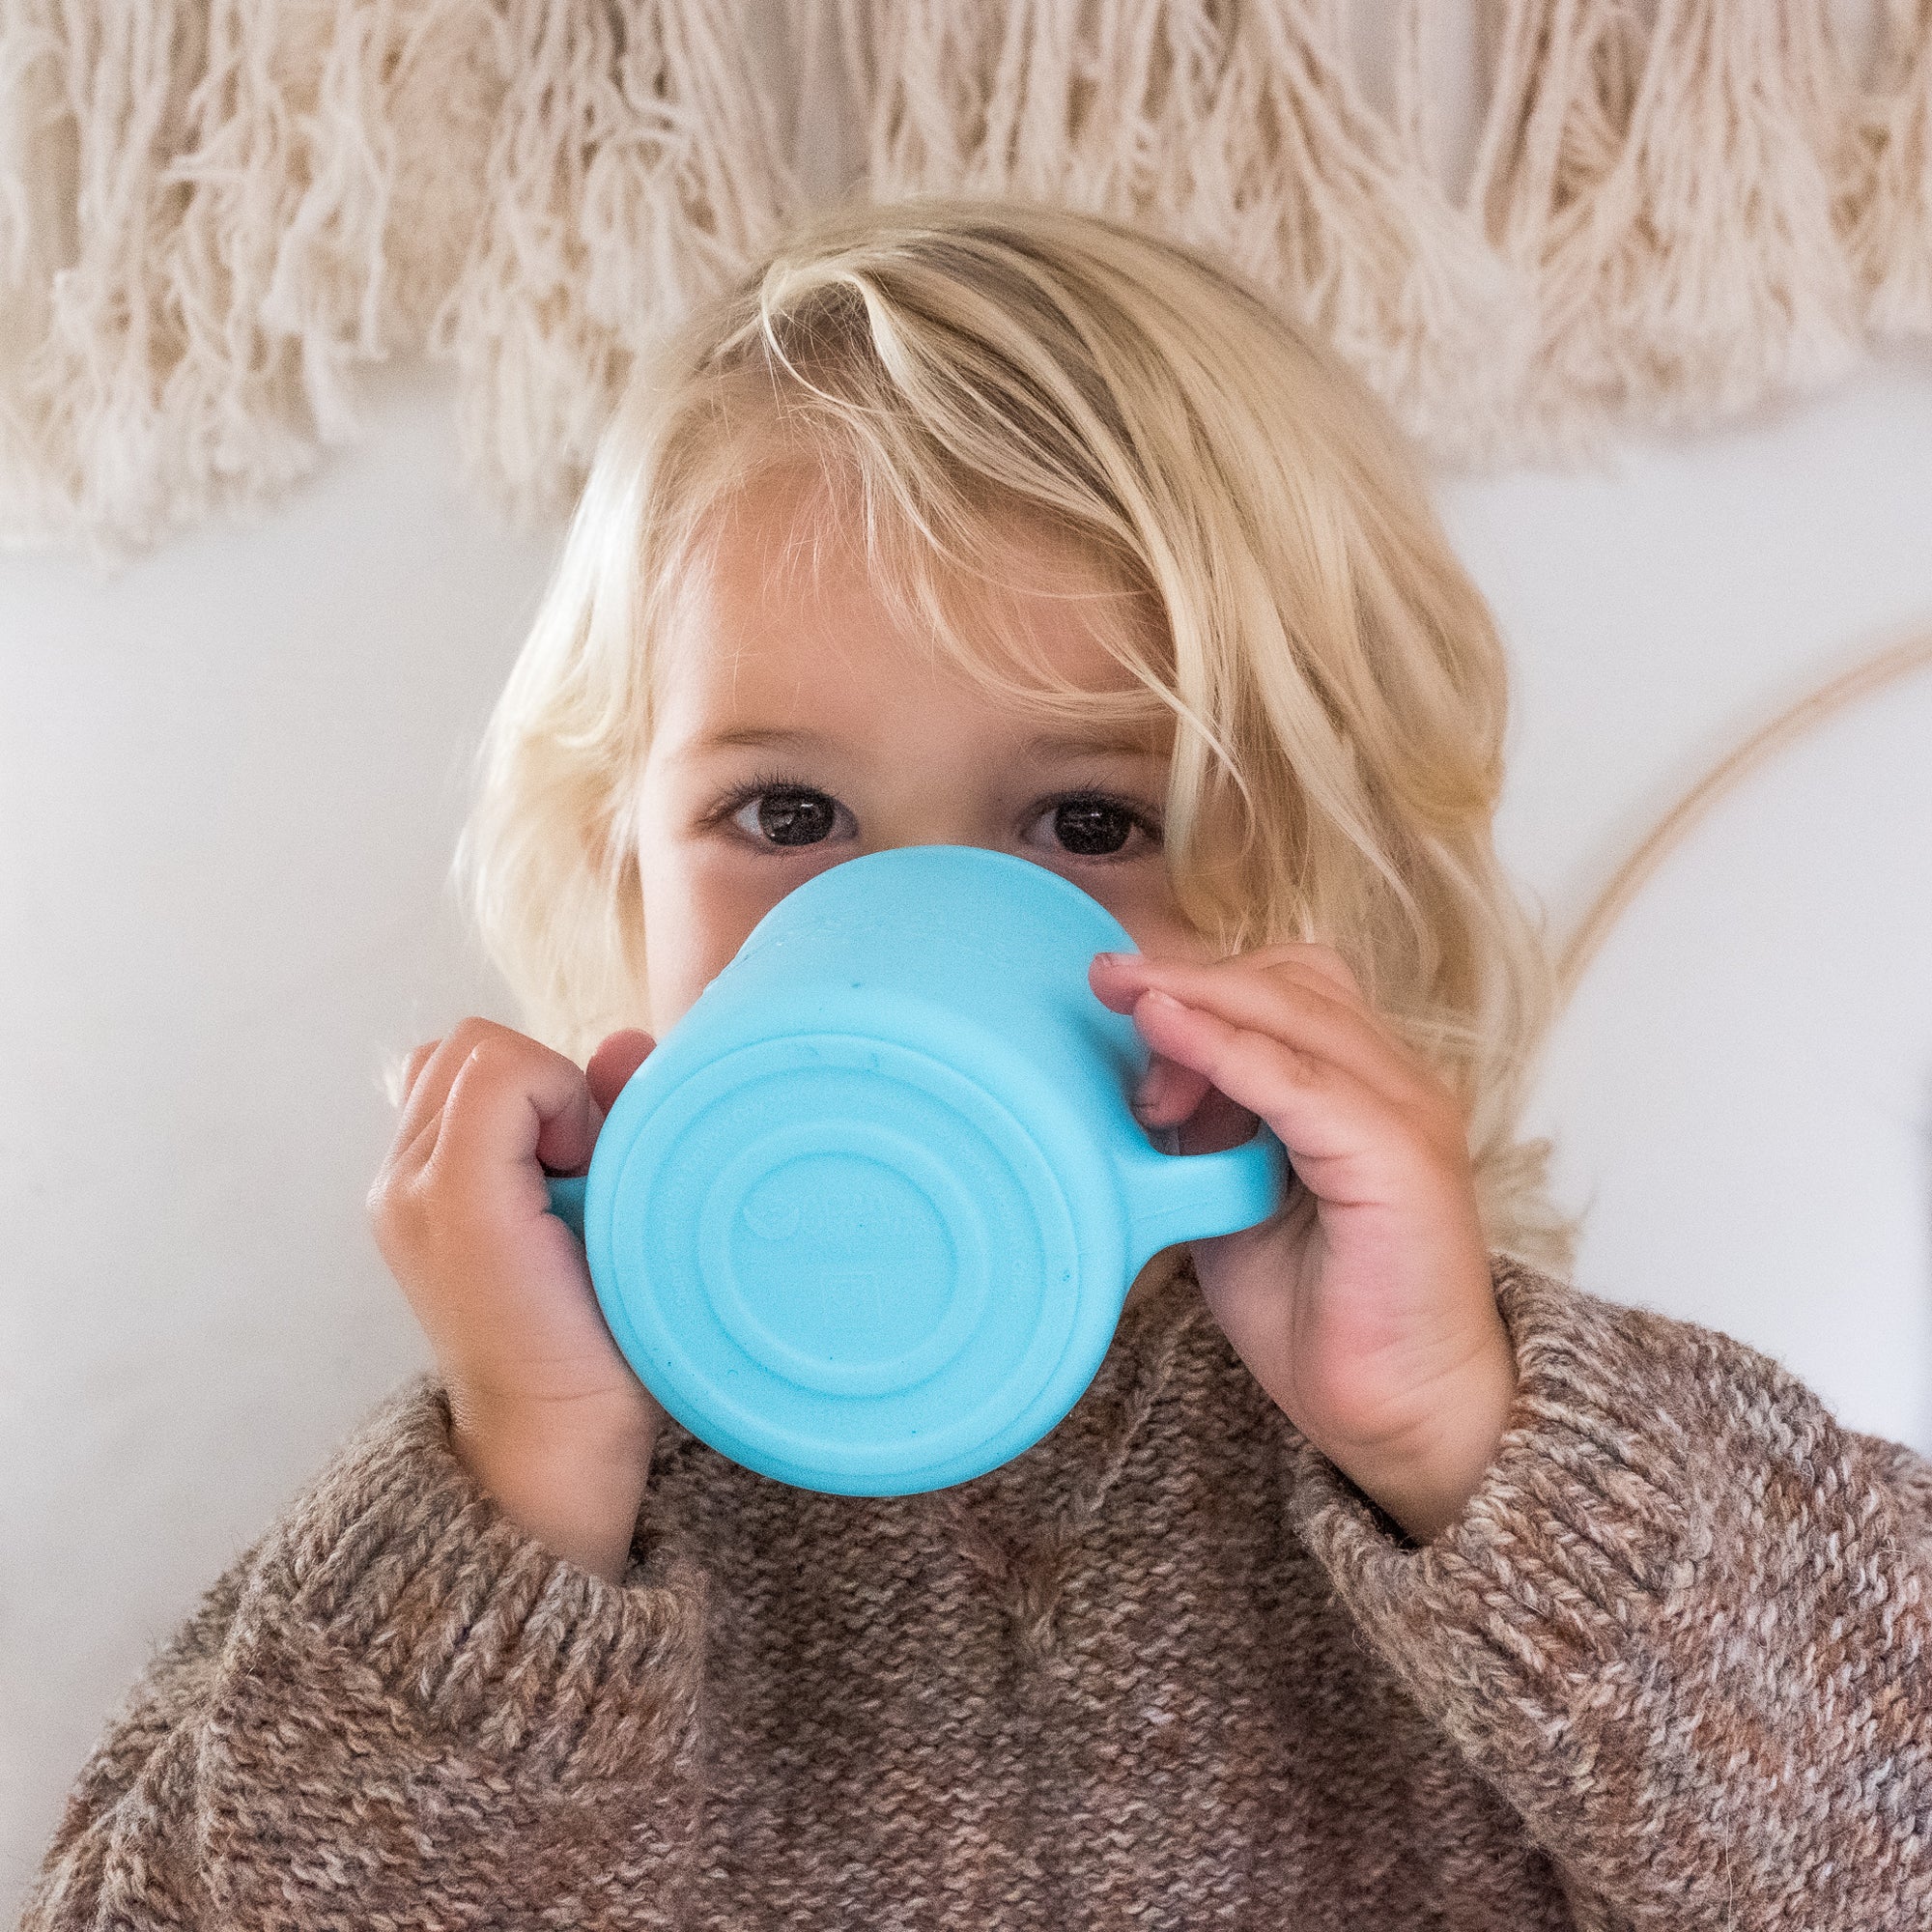 A young blonde boy drinking out of the Aqua Learning Cup made from Silicone